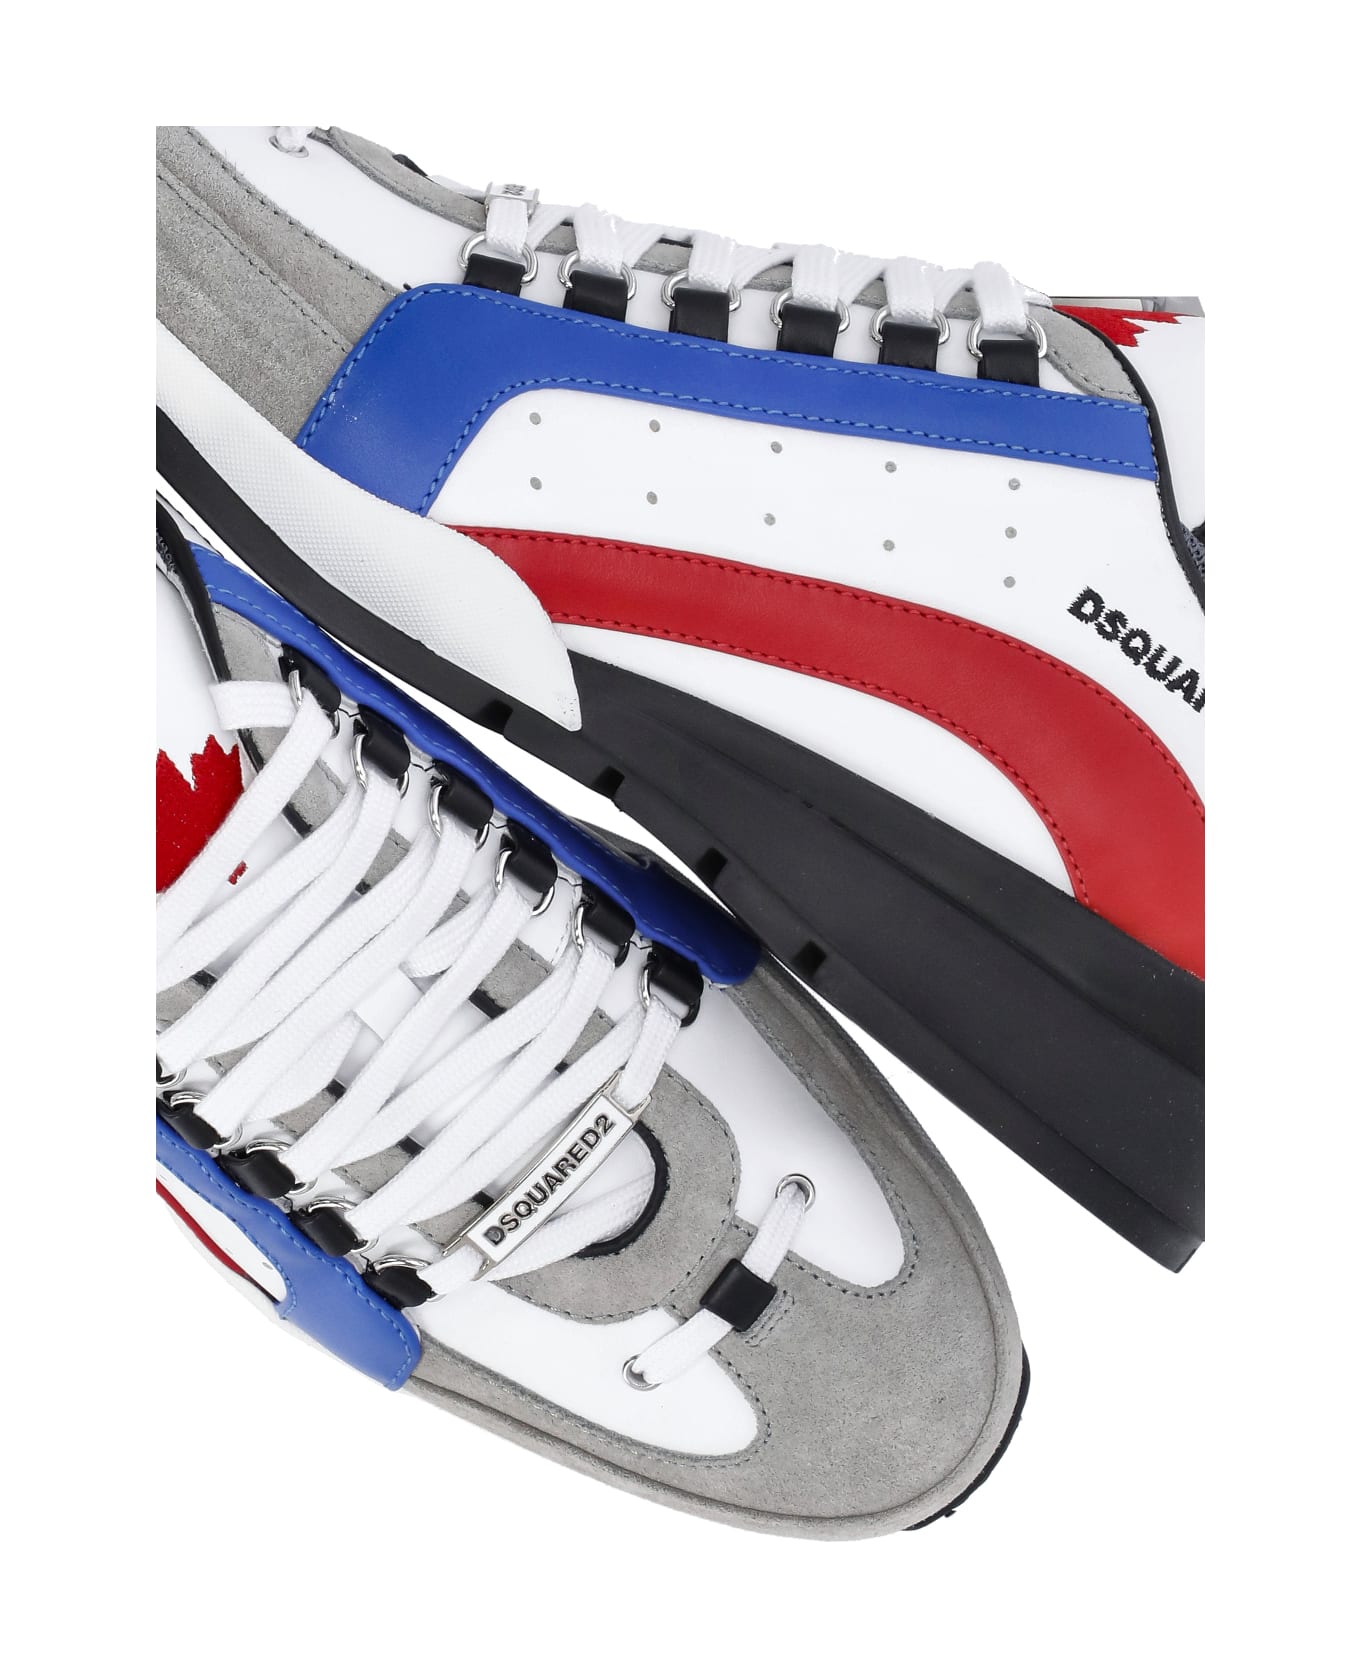 Dsquared2 Legendary Leather Low-top Sneakers - Multicolor スニーカー